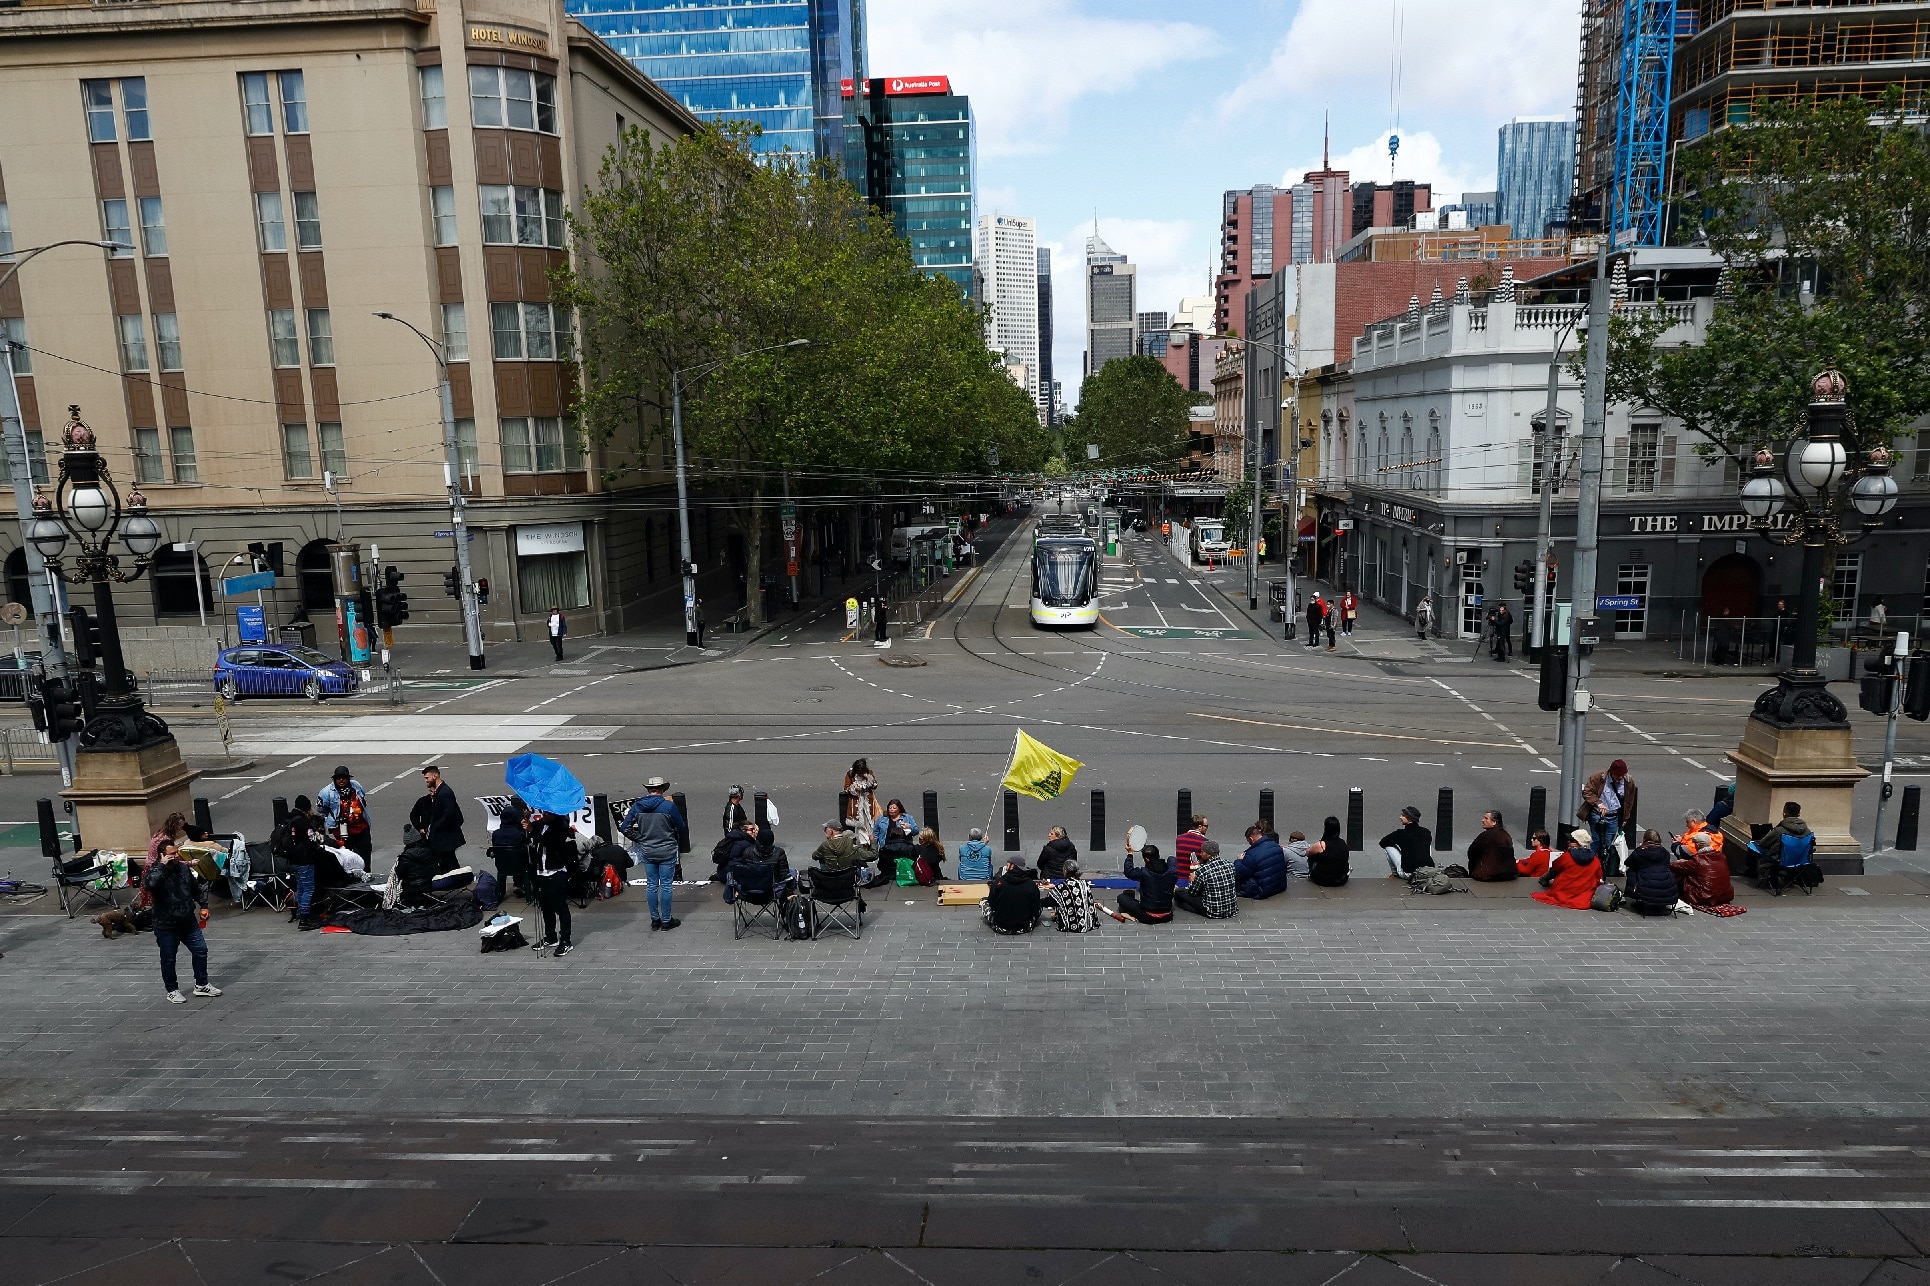 Protesters outside the Victorian State Parliament in Melbourne on 15 November 2021.